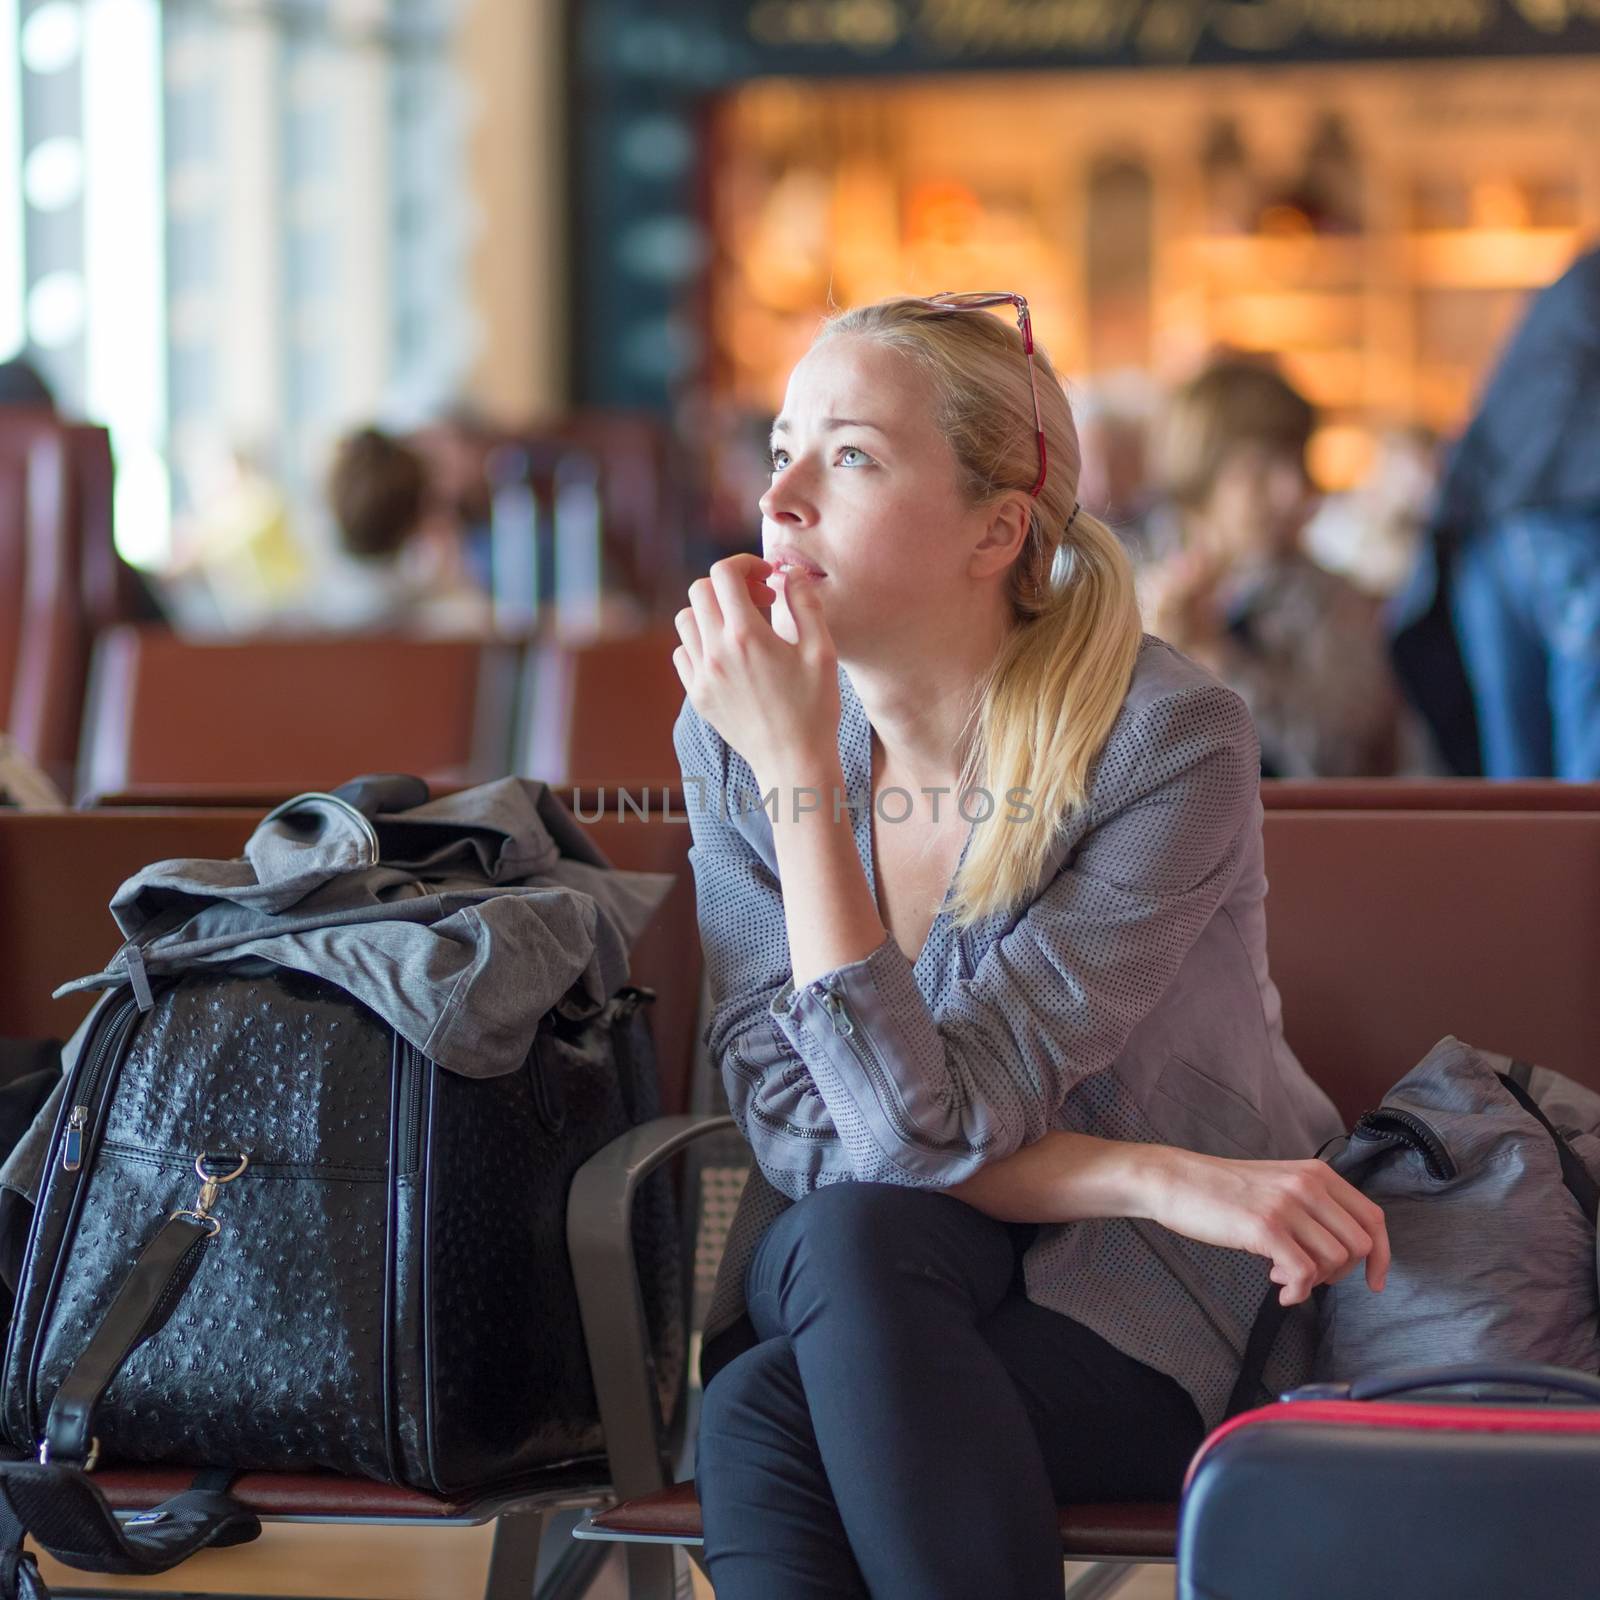 Young blond caucsian woman waiting on airport terminal full of passenegers for her flight to depart.